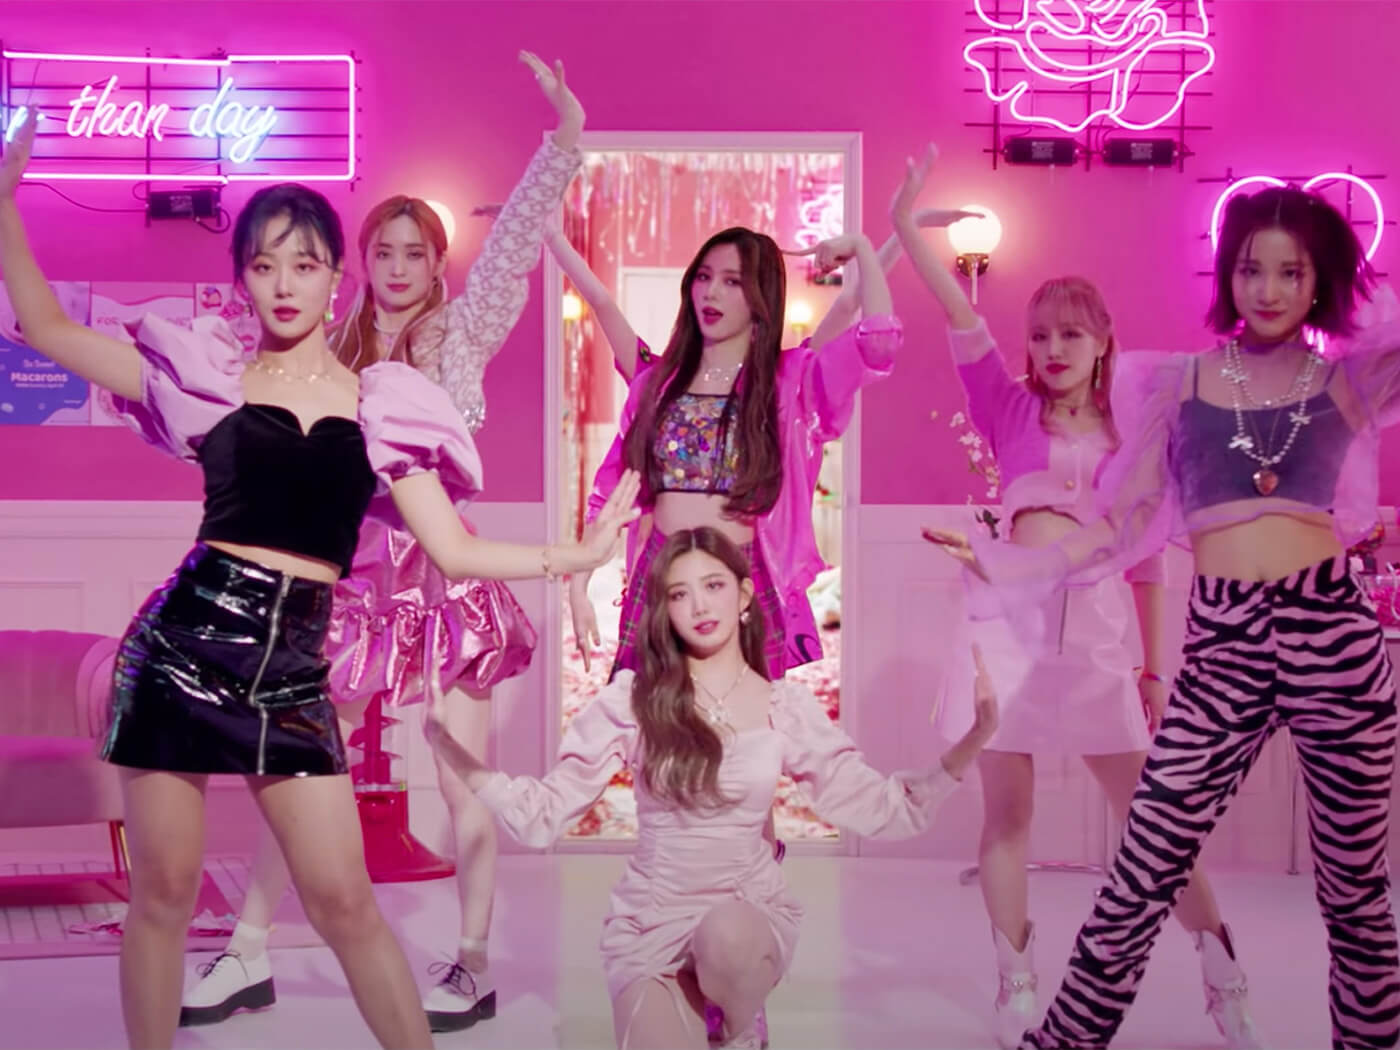 Hear Cherry Bullet's infectious new single, “Love So Sweet”